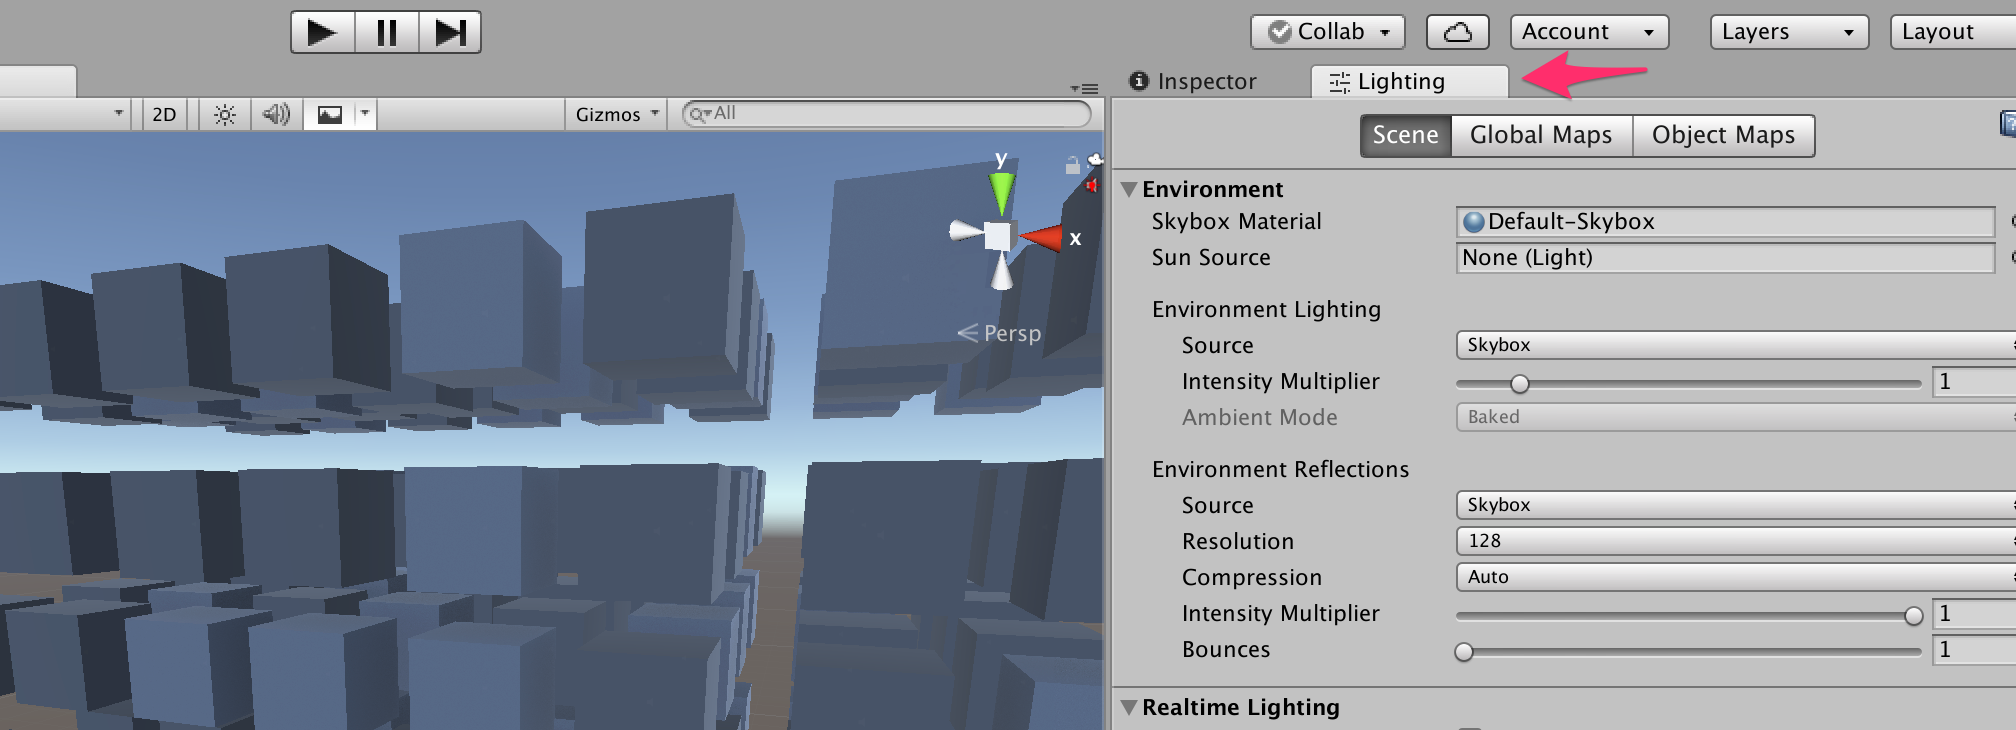 Unity_2018_1_0f2_Personal__64bit__-_stage4_unity_-_FPS2018_-_Android__Personal___Metal_.png